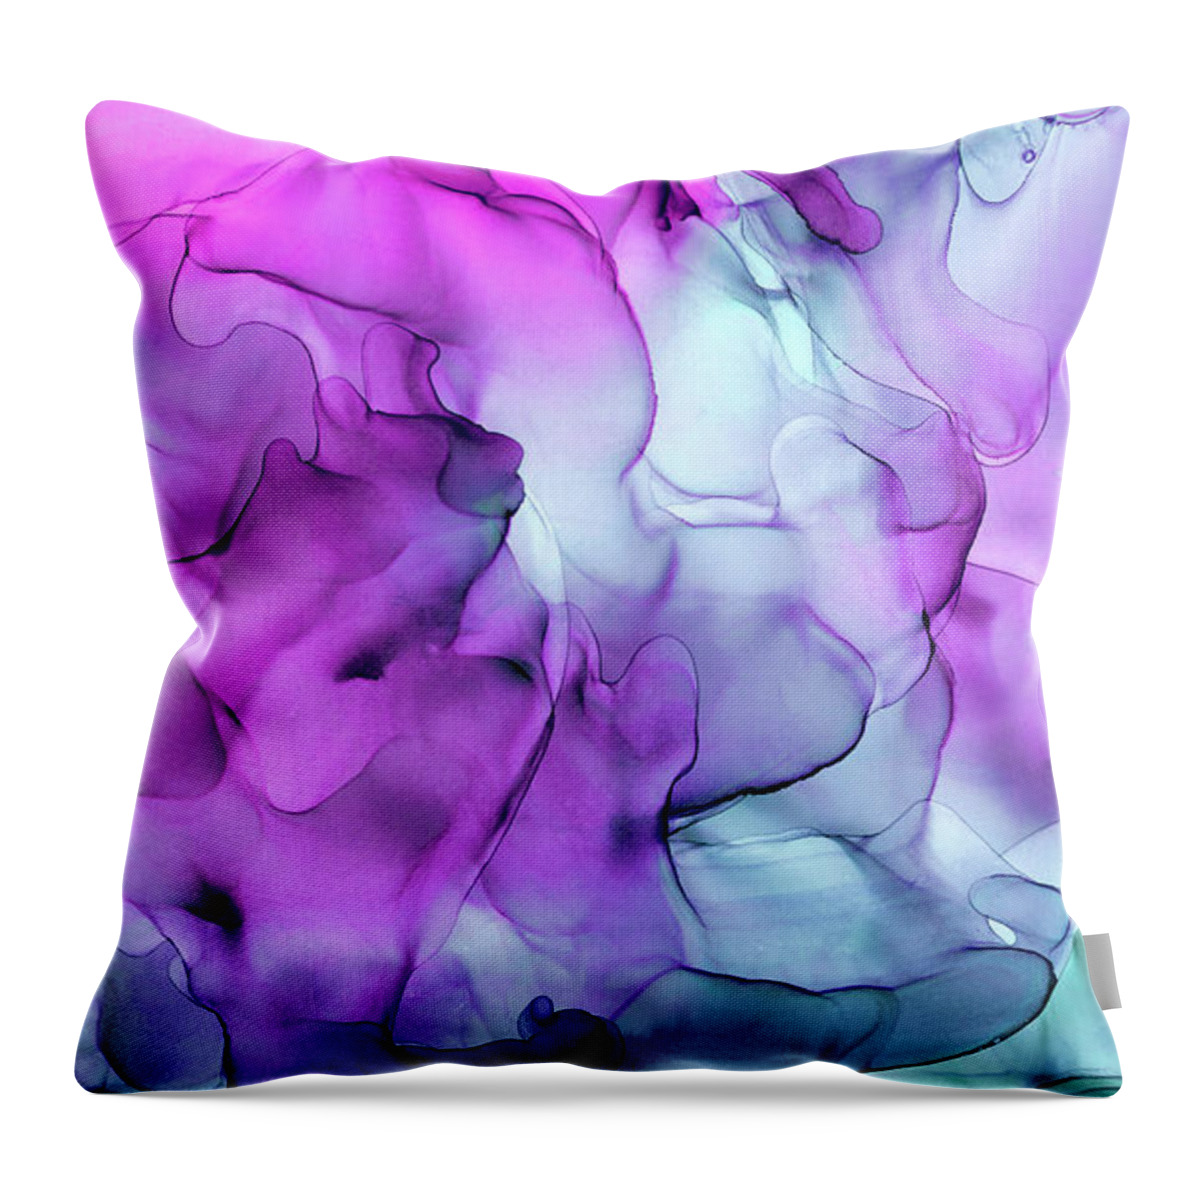 Ink Throw Pillow featuring the painting Mermaid Abstract Ink Painting by Olga Shvartsur